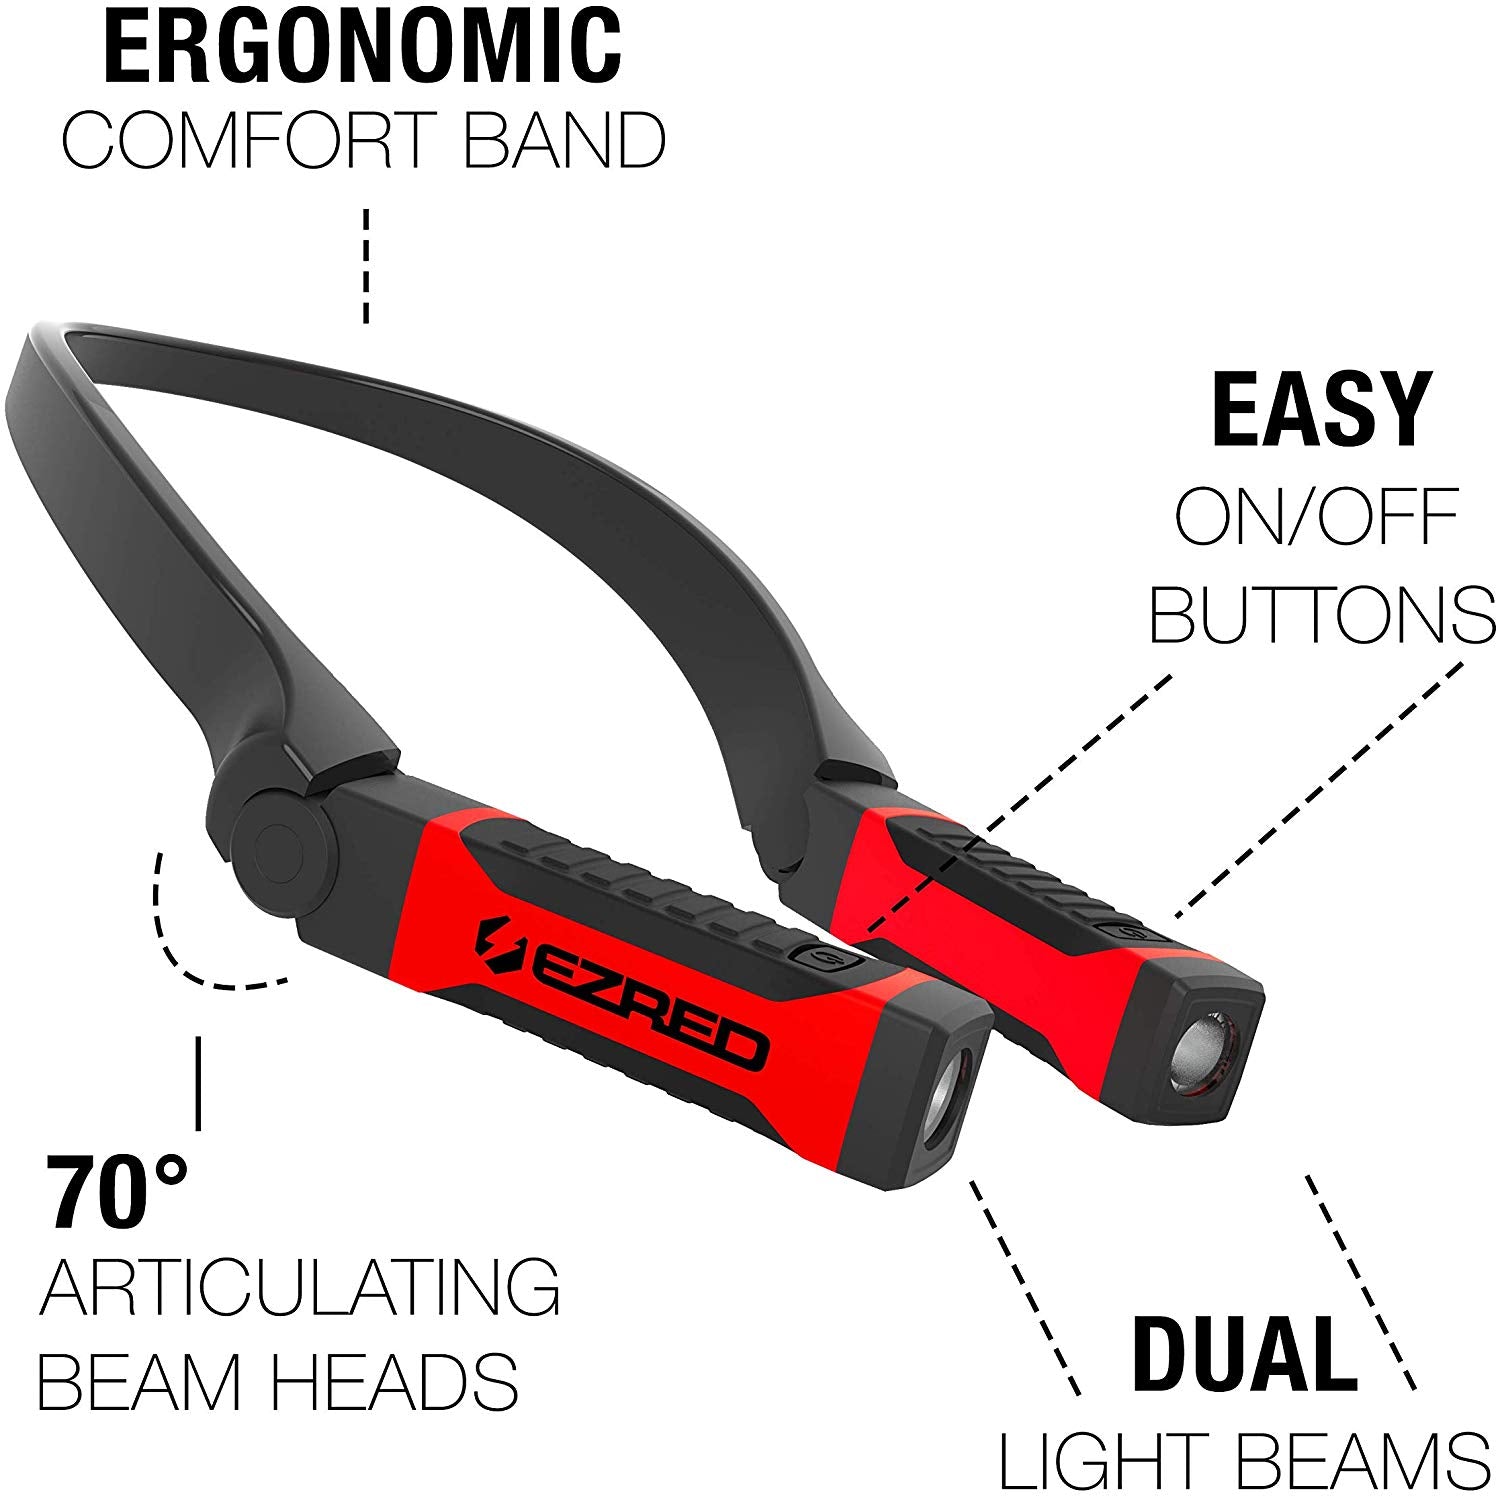 EZRED Bright NK10 Anywear Neck Light for Hands-Free Lighting - MPR Tools & Equipment